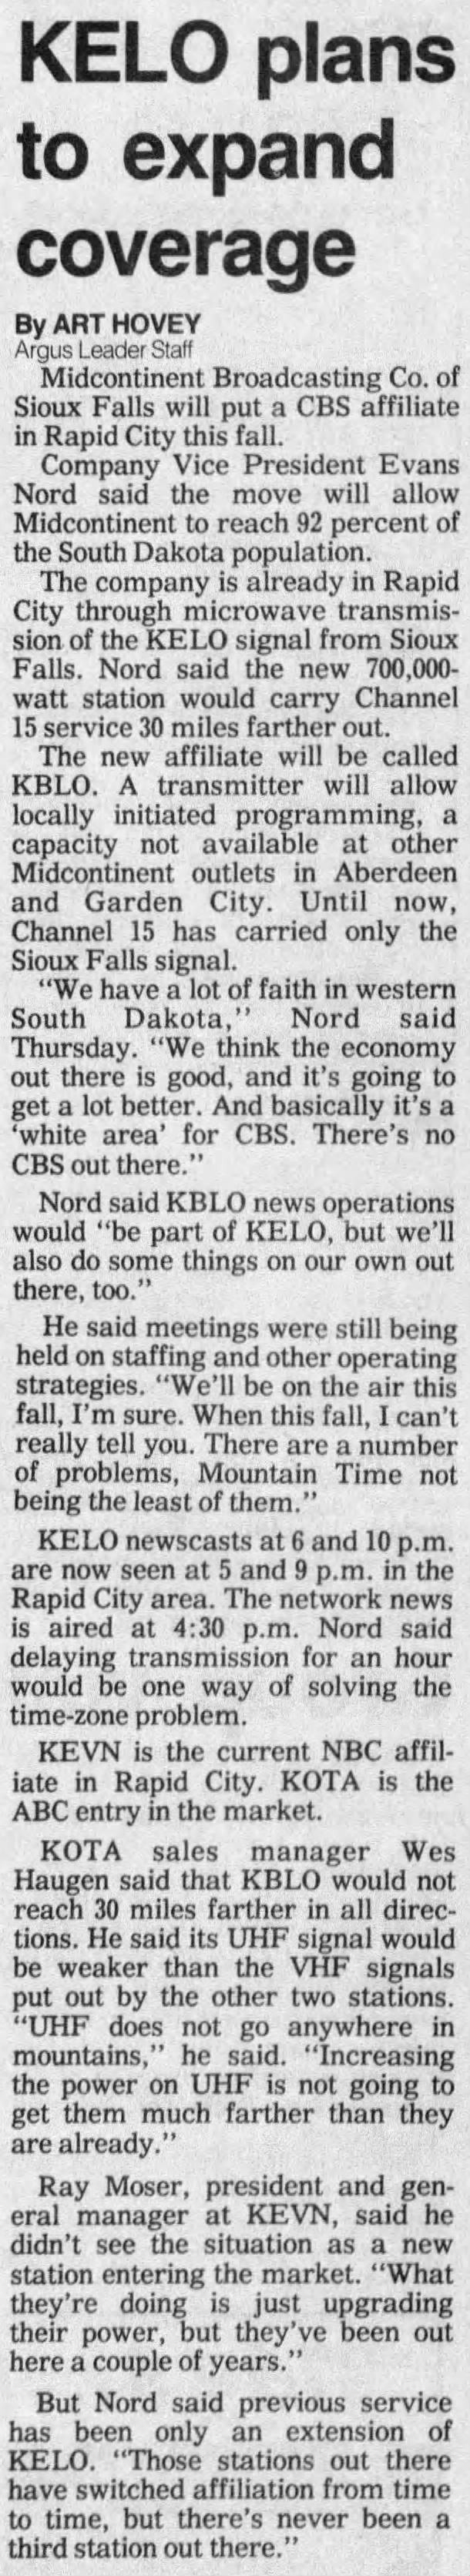 KELO plans to expand coverage